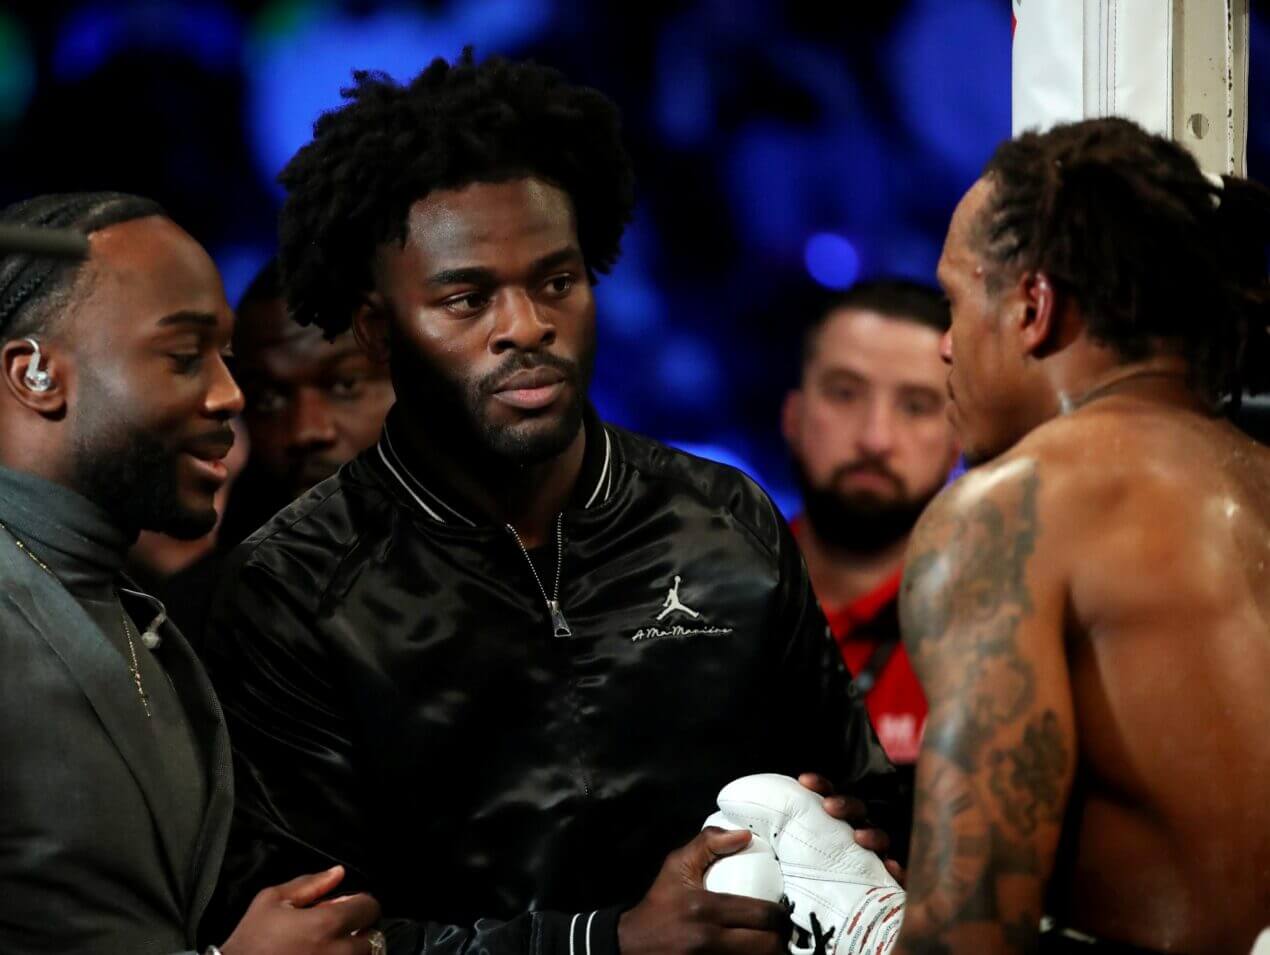 Joshua Buatsi and Anthony Yarde had verbally agreed to a fight